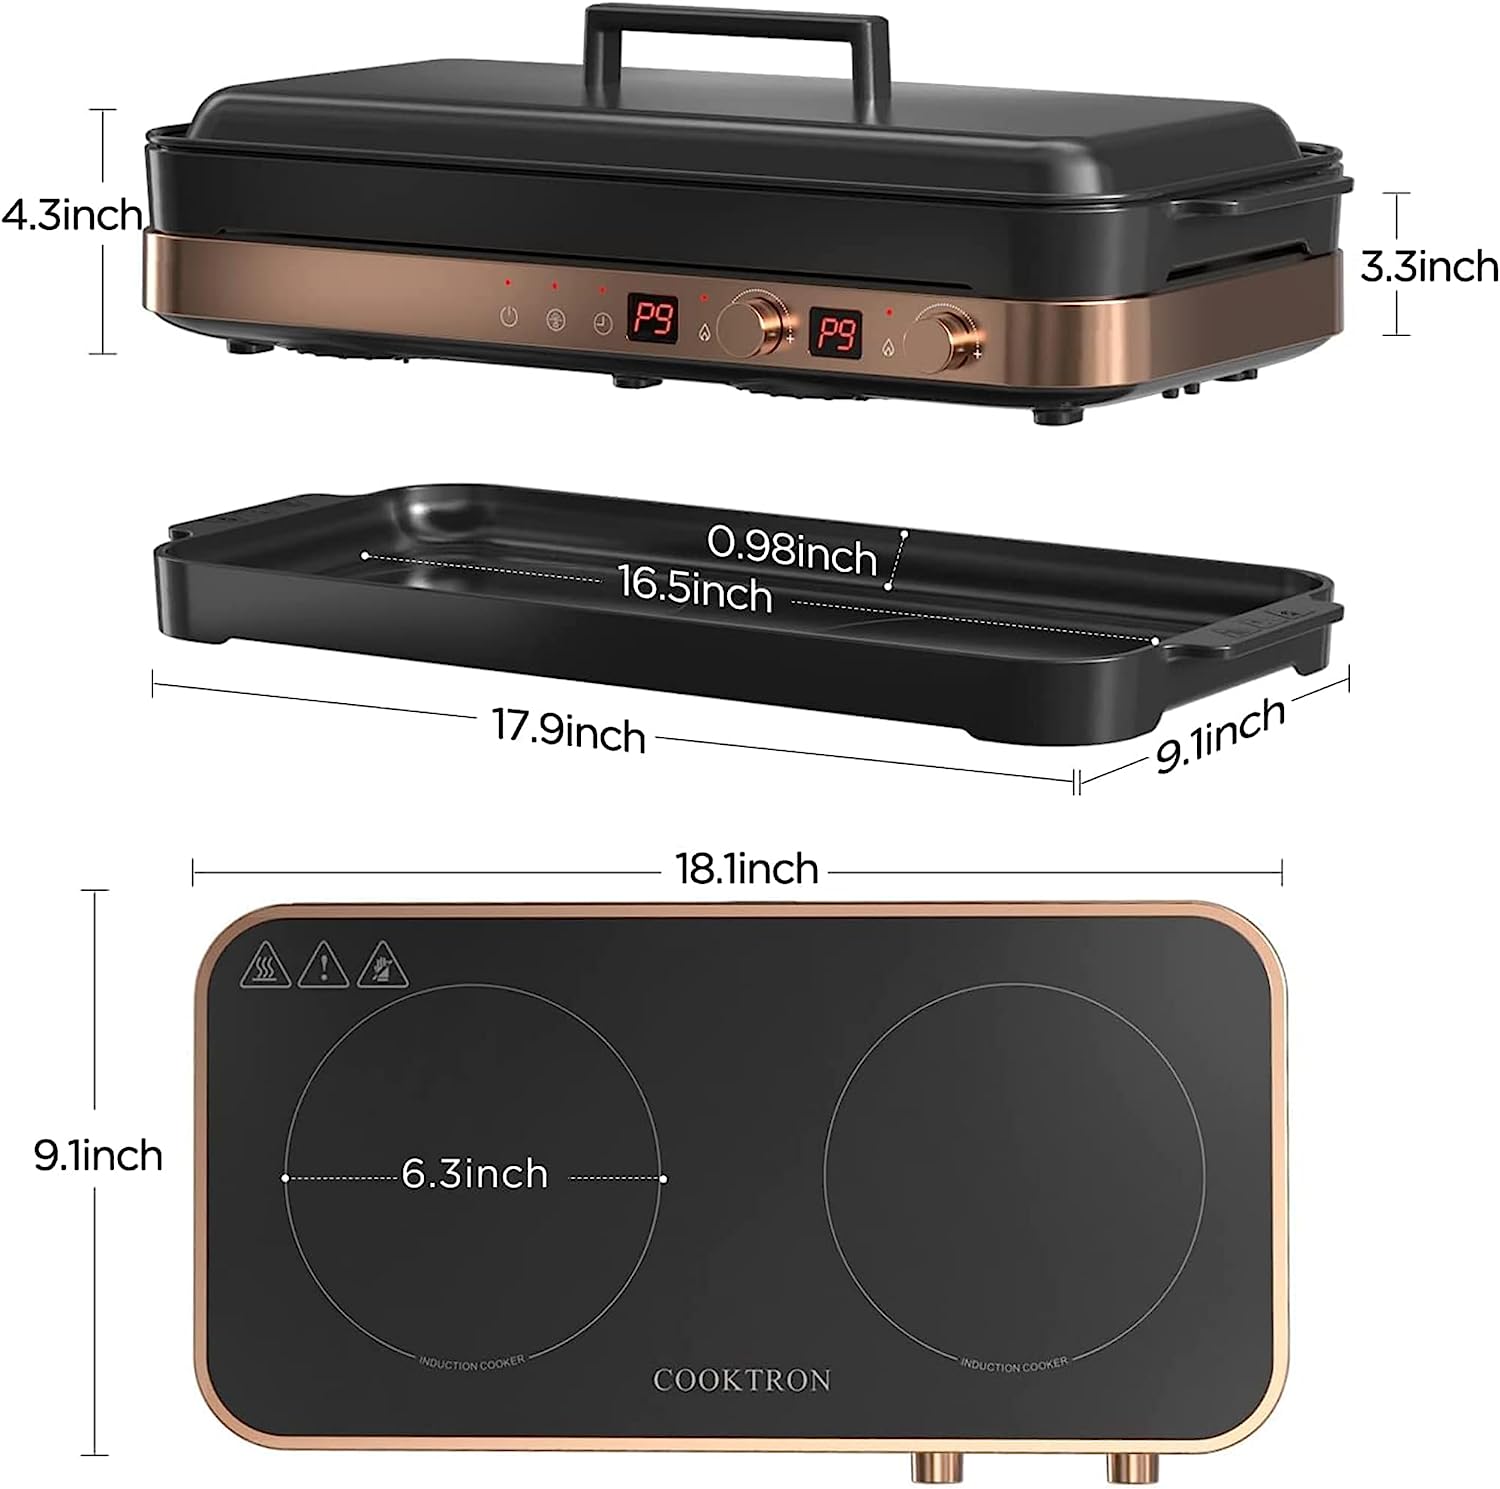 https://bigbigmart.com/wp-content/uploads/2023/07/COOKTRON-Portable-Compact-2-Burner-Induction-Cooktop-Electric-Stove-w-Smokeless-Cast-Iron-Griddle-Grill-Temperature-Control-Child-Lock-Rose-Gold3.jpg